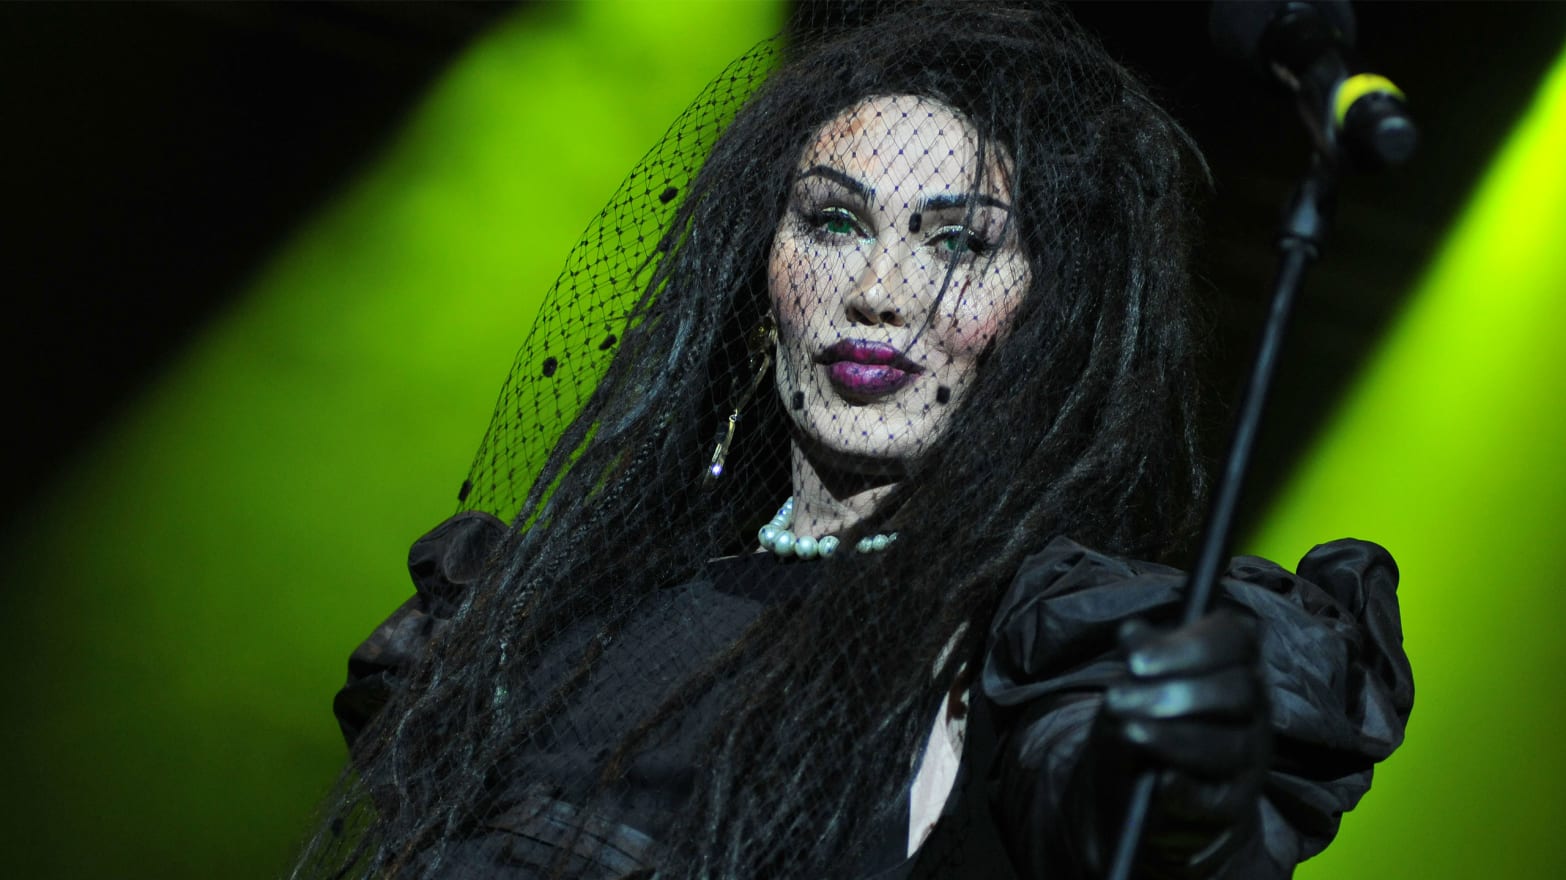 RIP, Pete Burns, and Thanks for Spinning Us Round, Right Round, Like a  Record, Baby